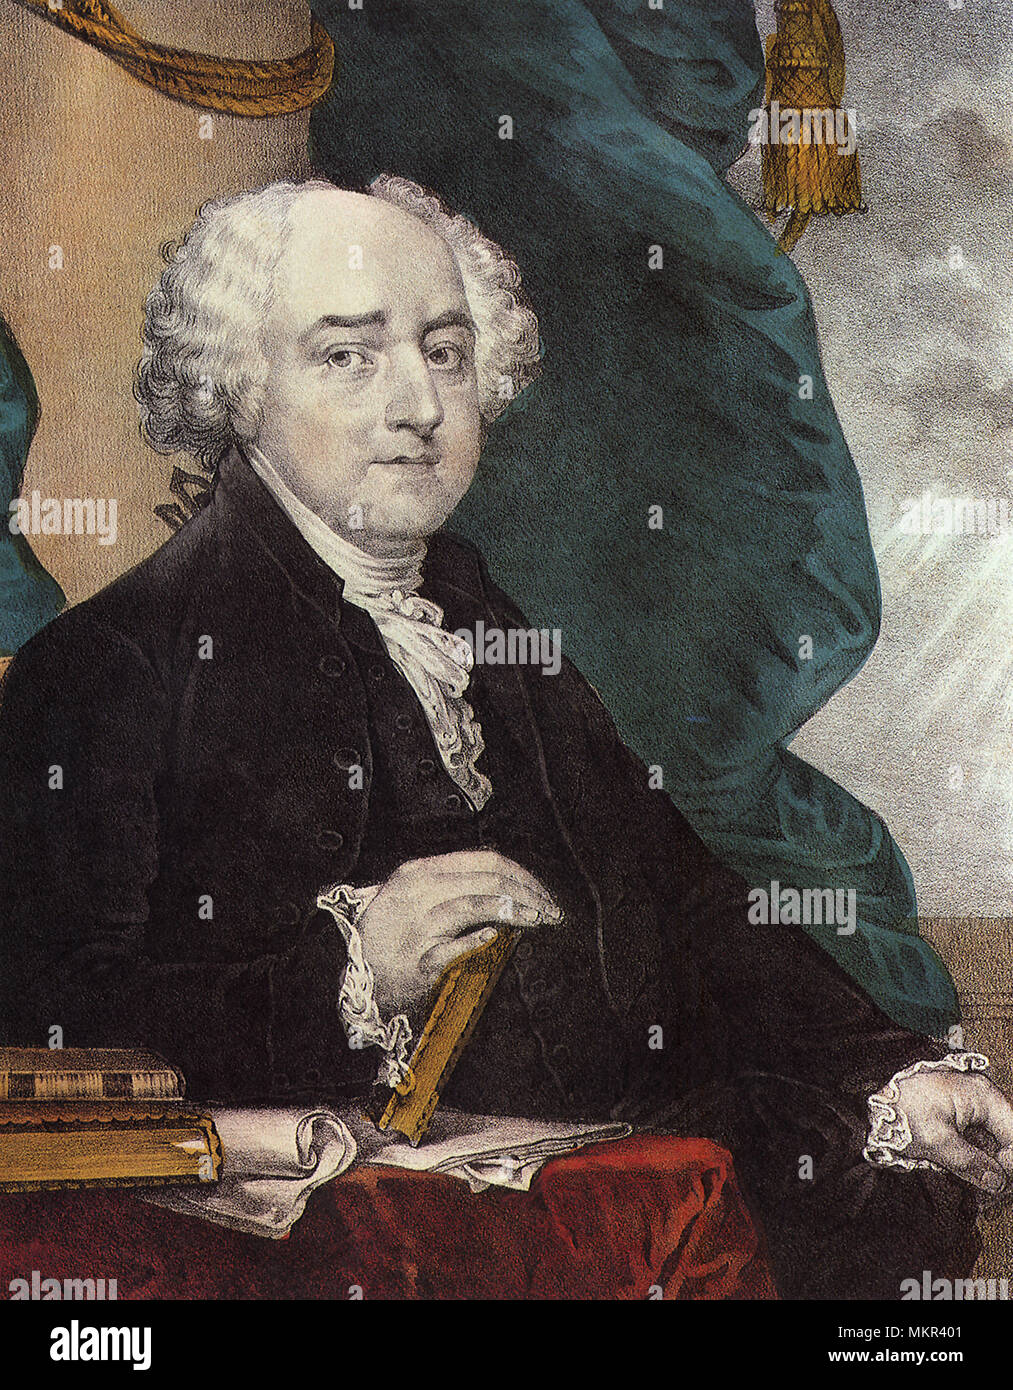 John Adams, Second President of the United States 1797 Stock Photo